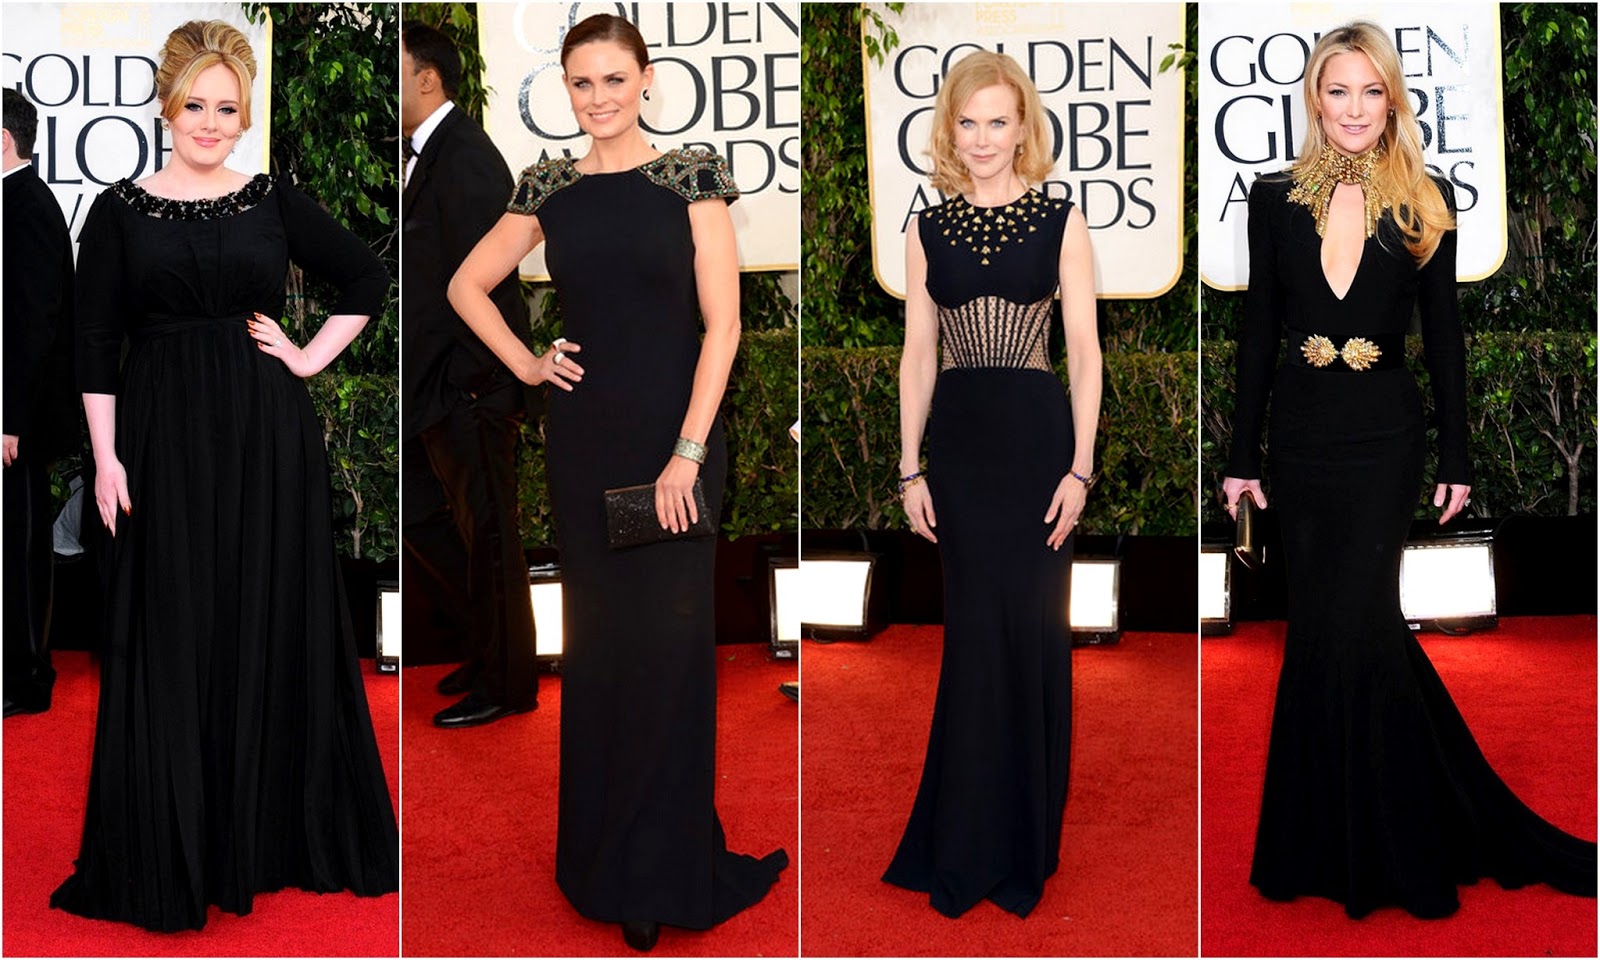 golden globes style red carpet1600 x 960